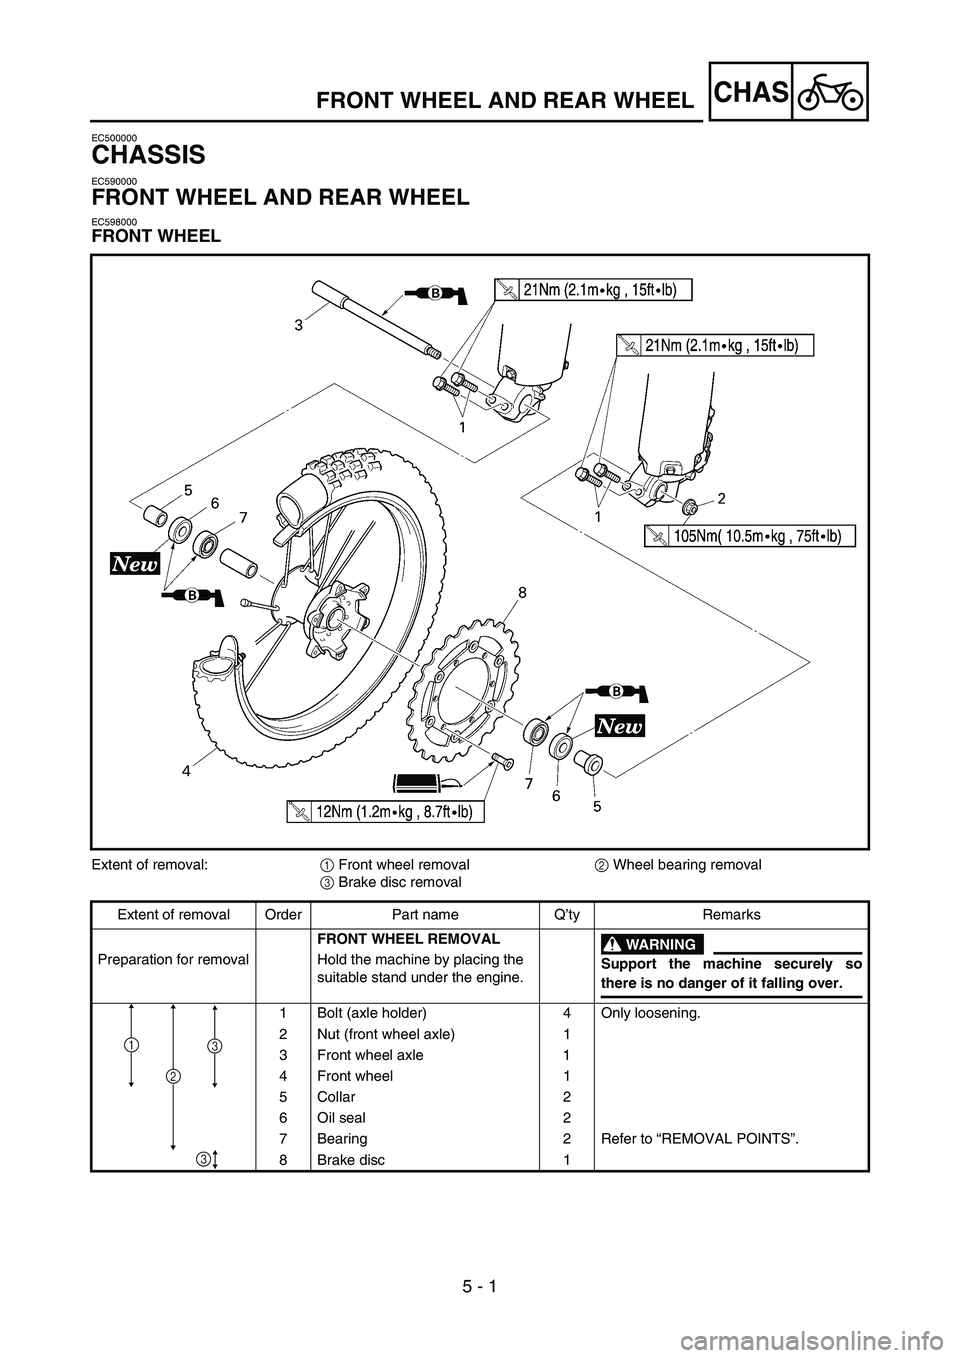 YAMAHA YZ250F 2007  Owners Manual 5 - 1
CHAS
EC500000
CHASSIS
EC590000
FRONT WHEEL AND REAR WHEEL
EC598000
FRONT WHEEL
FRONT WHEEL AND REAR WHEEL
Extent of removal:
1 Front wheel removal
2 Wheel bearing removal
3 Brake disc removal
Ex